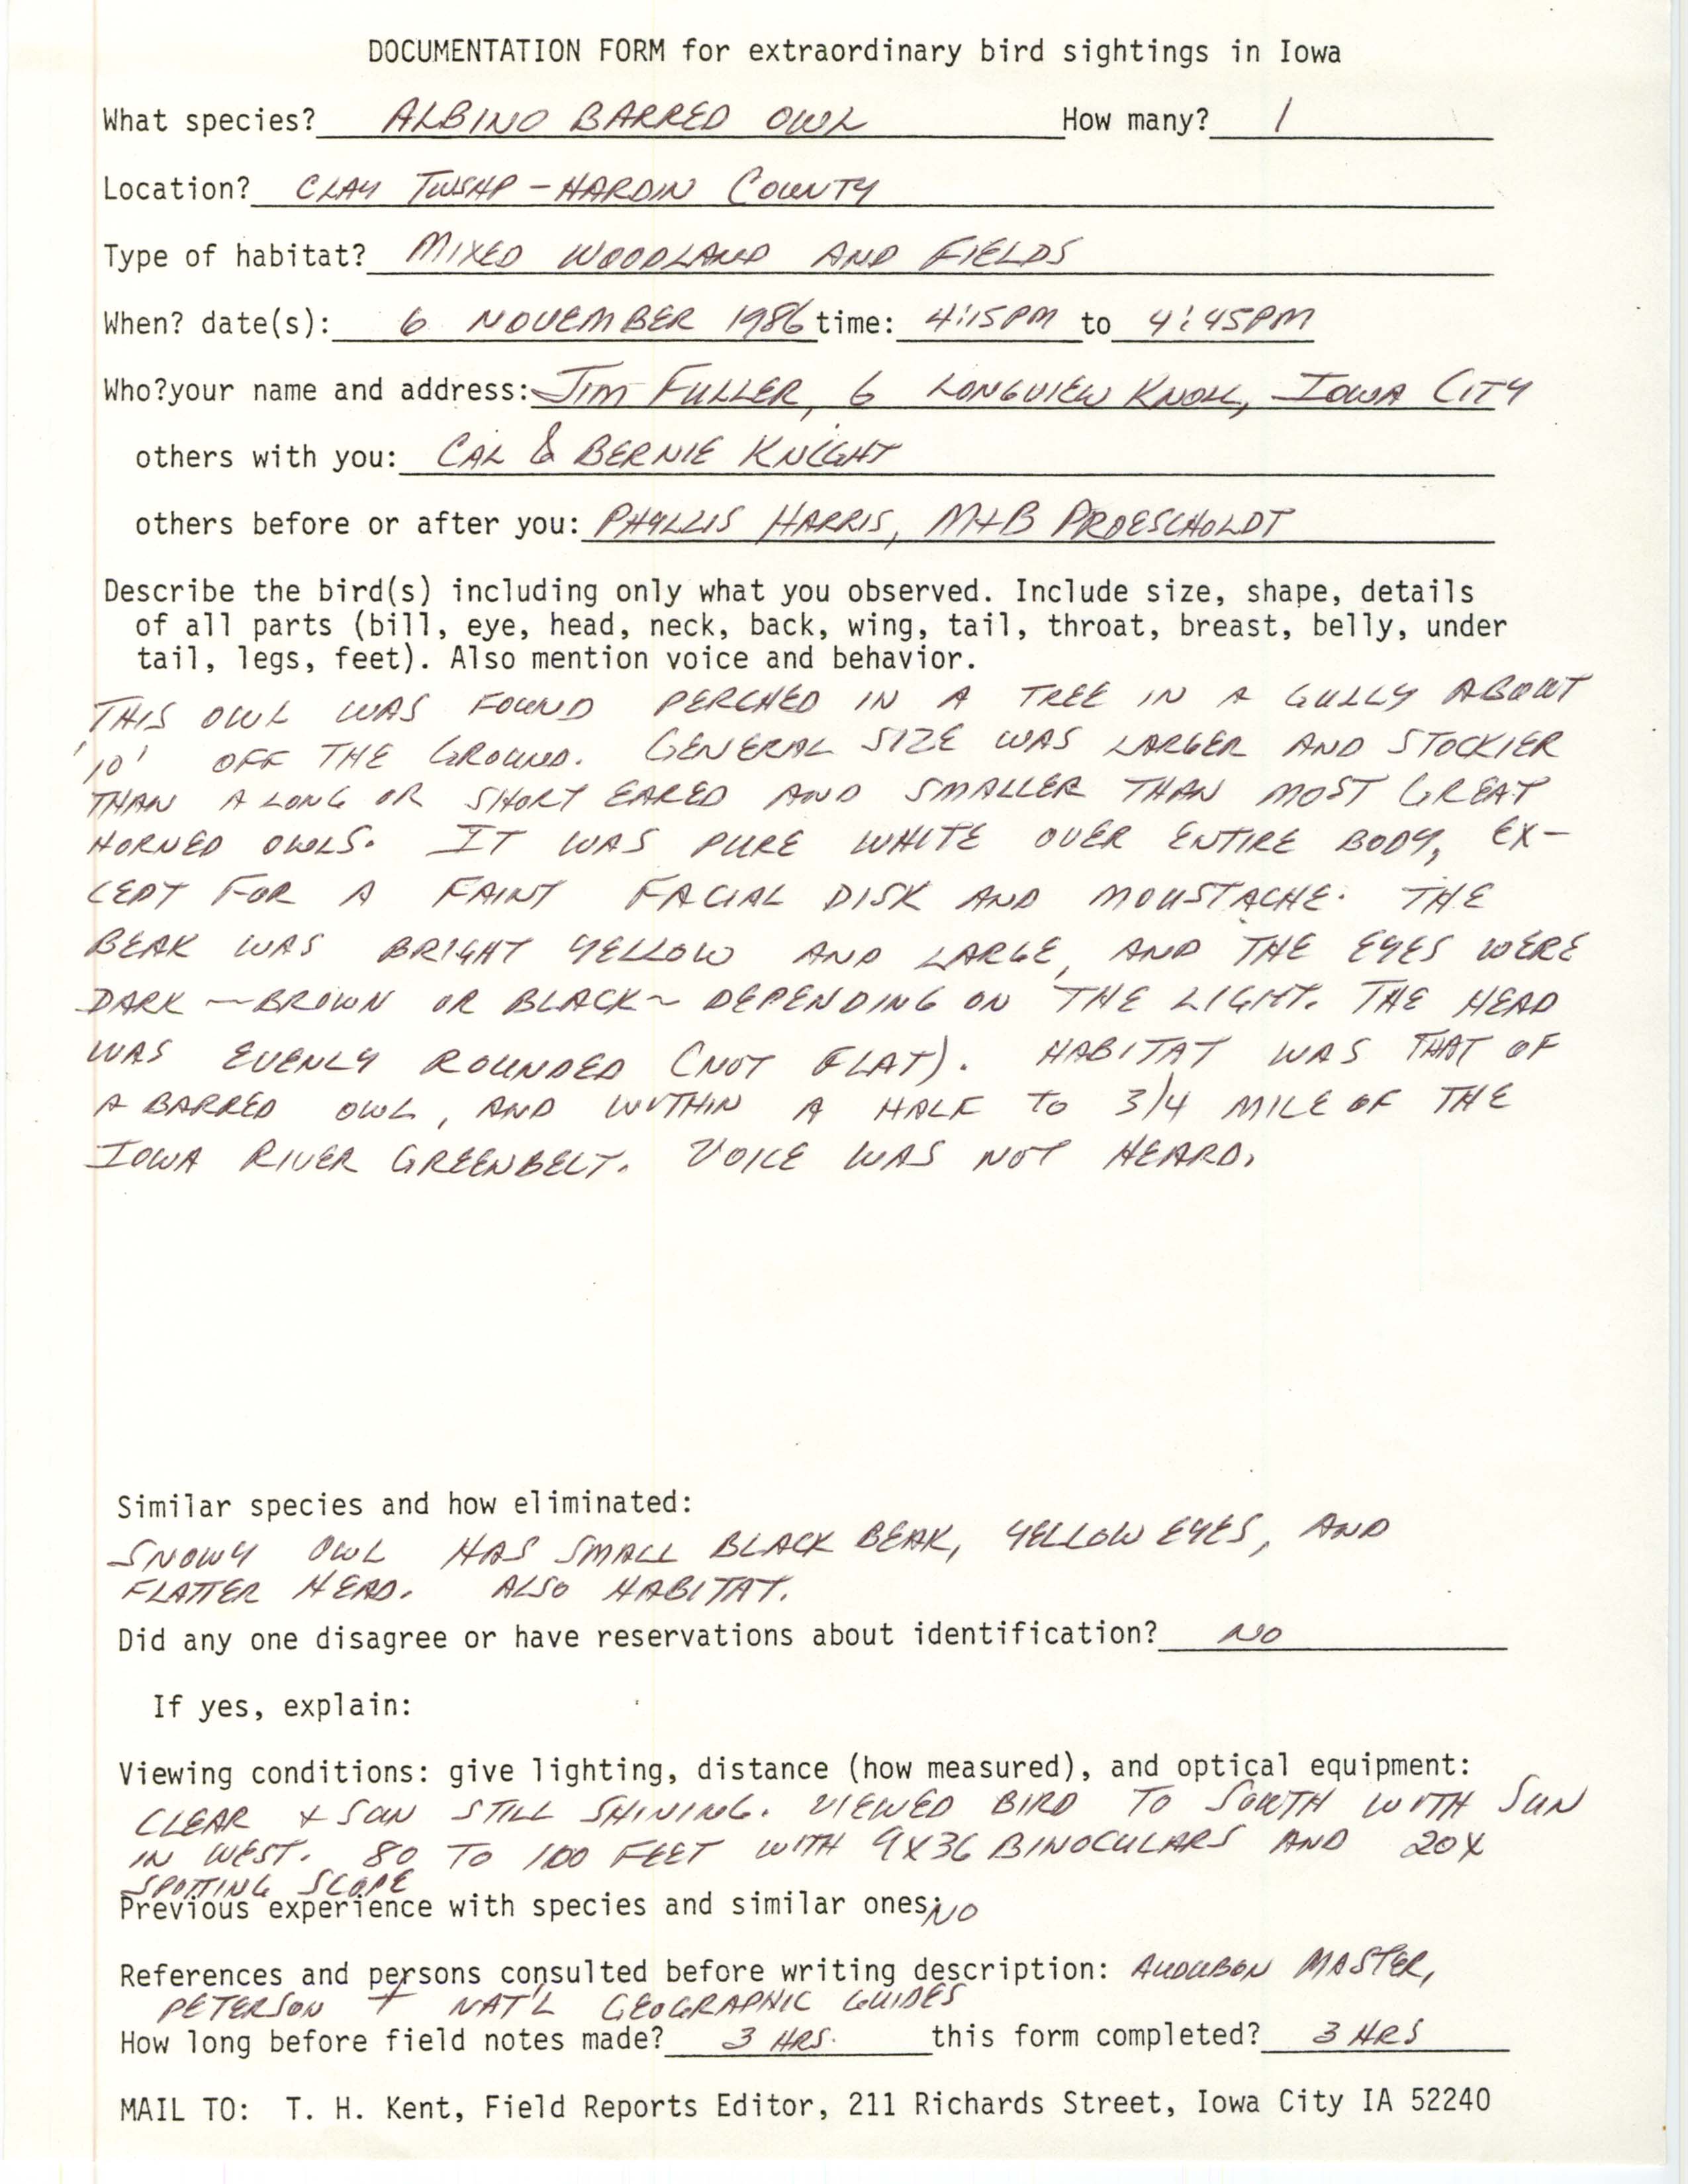 Rare bird documentation form for albino Barred Owl at Clay Township in Hardin County, 1986